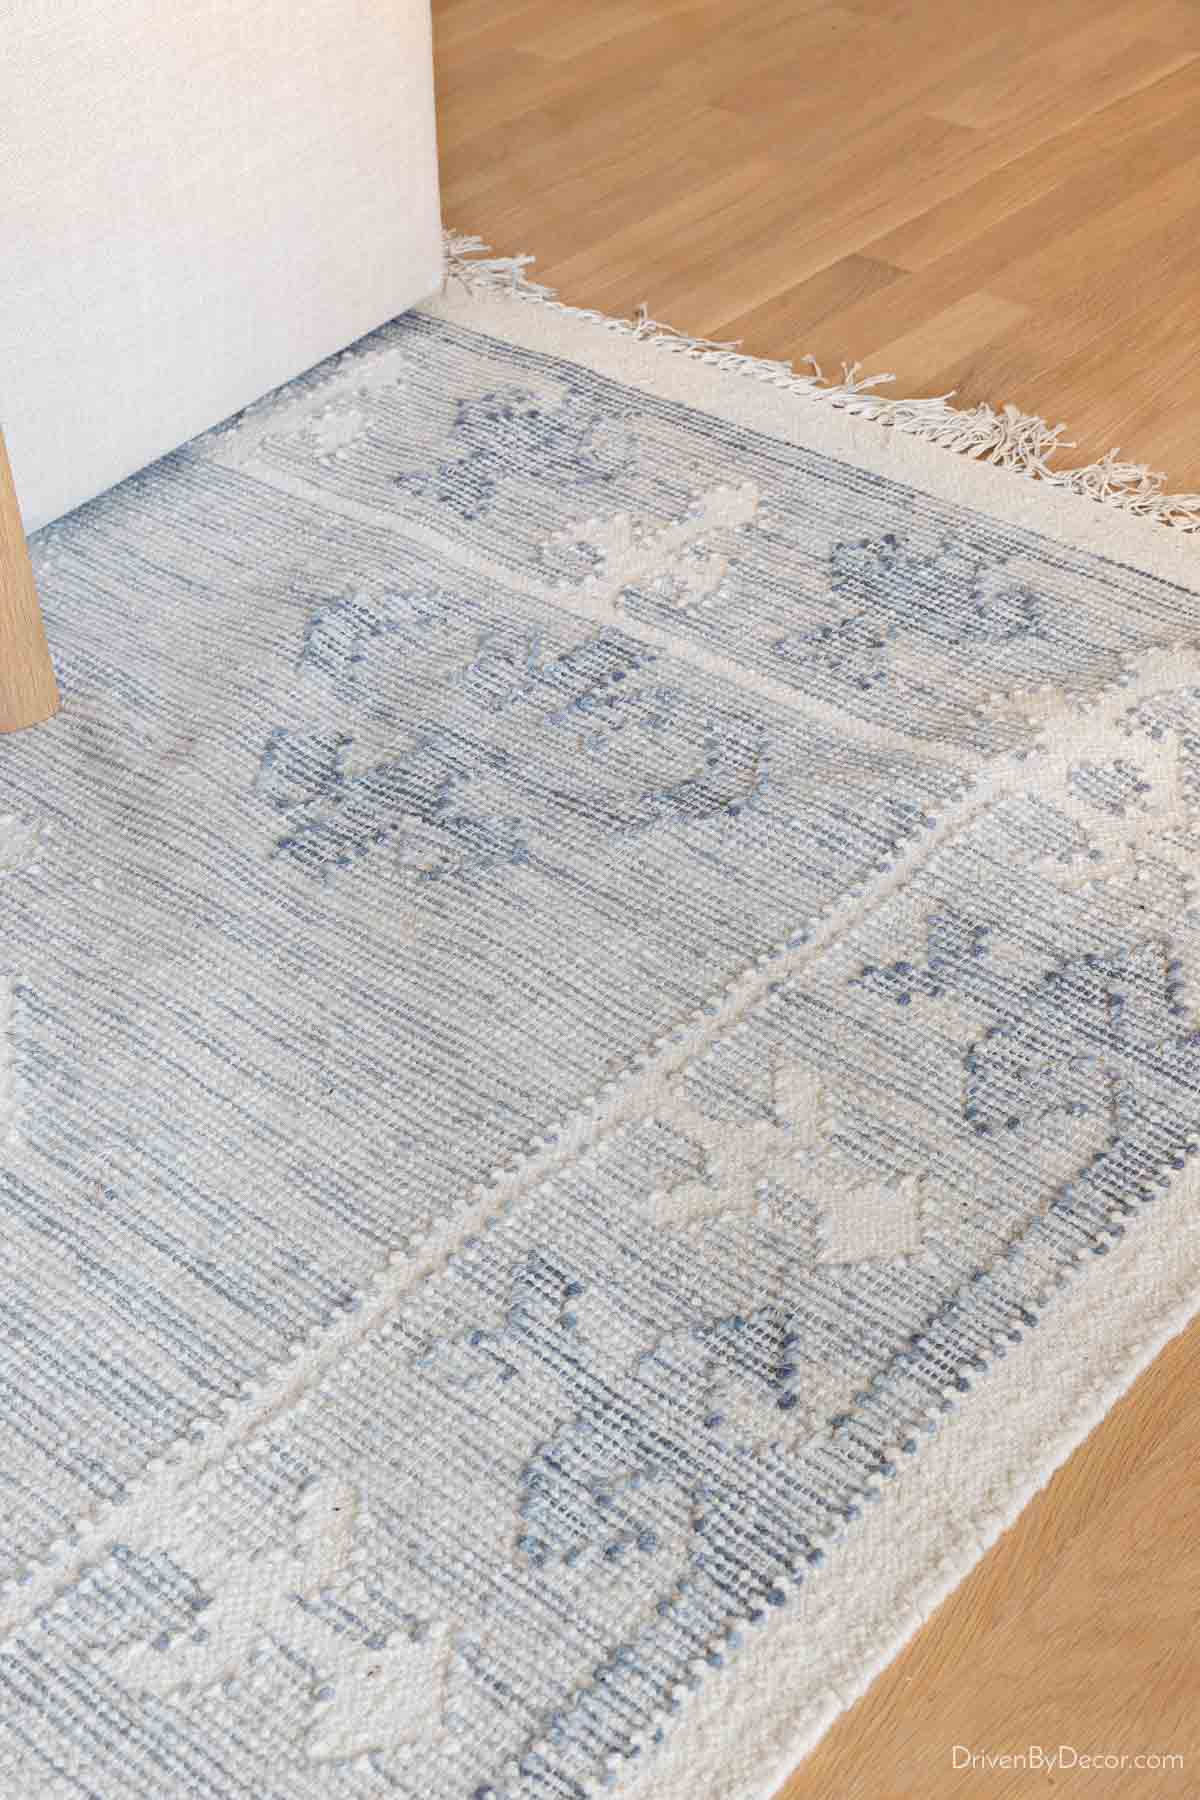 Wrinkled rug without rug pad